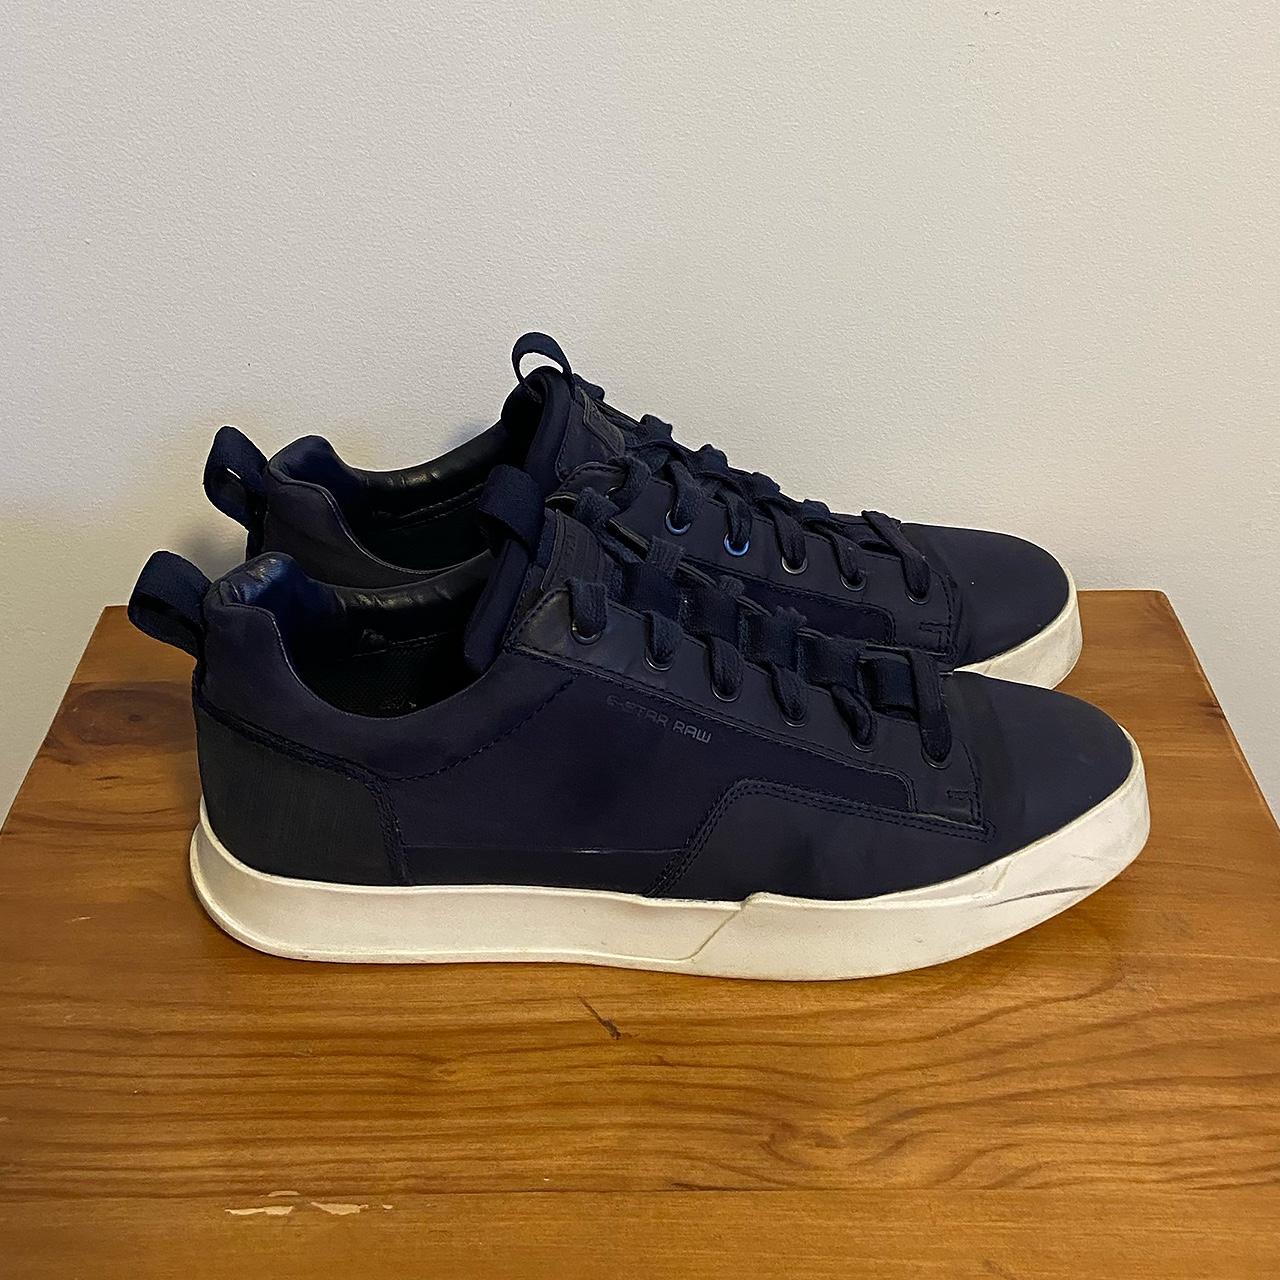 G-Star RAW Rackam Core lowtop sneakers in size... -